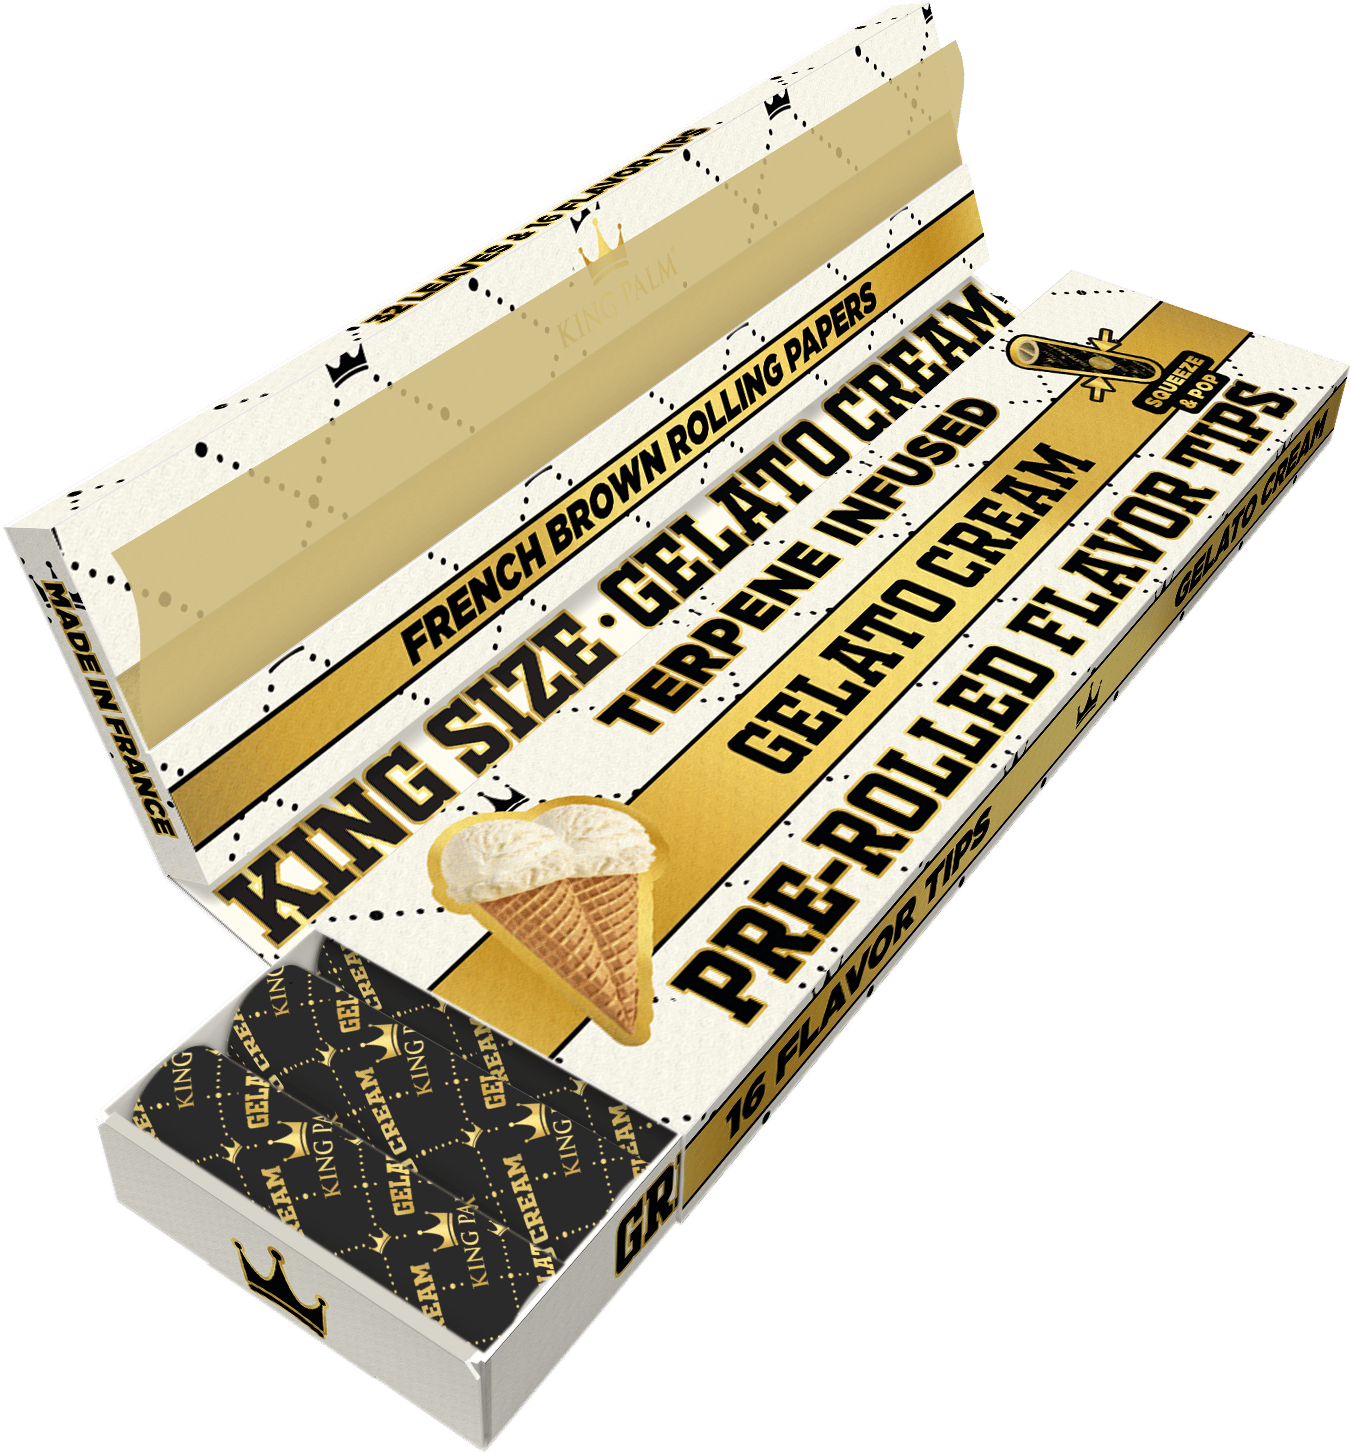 King Palm - King Size, French Rolling Papers & Flavoured Tips